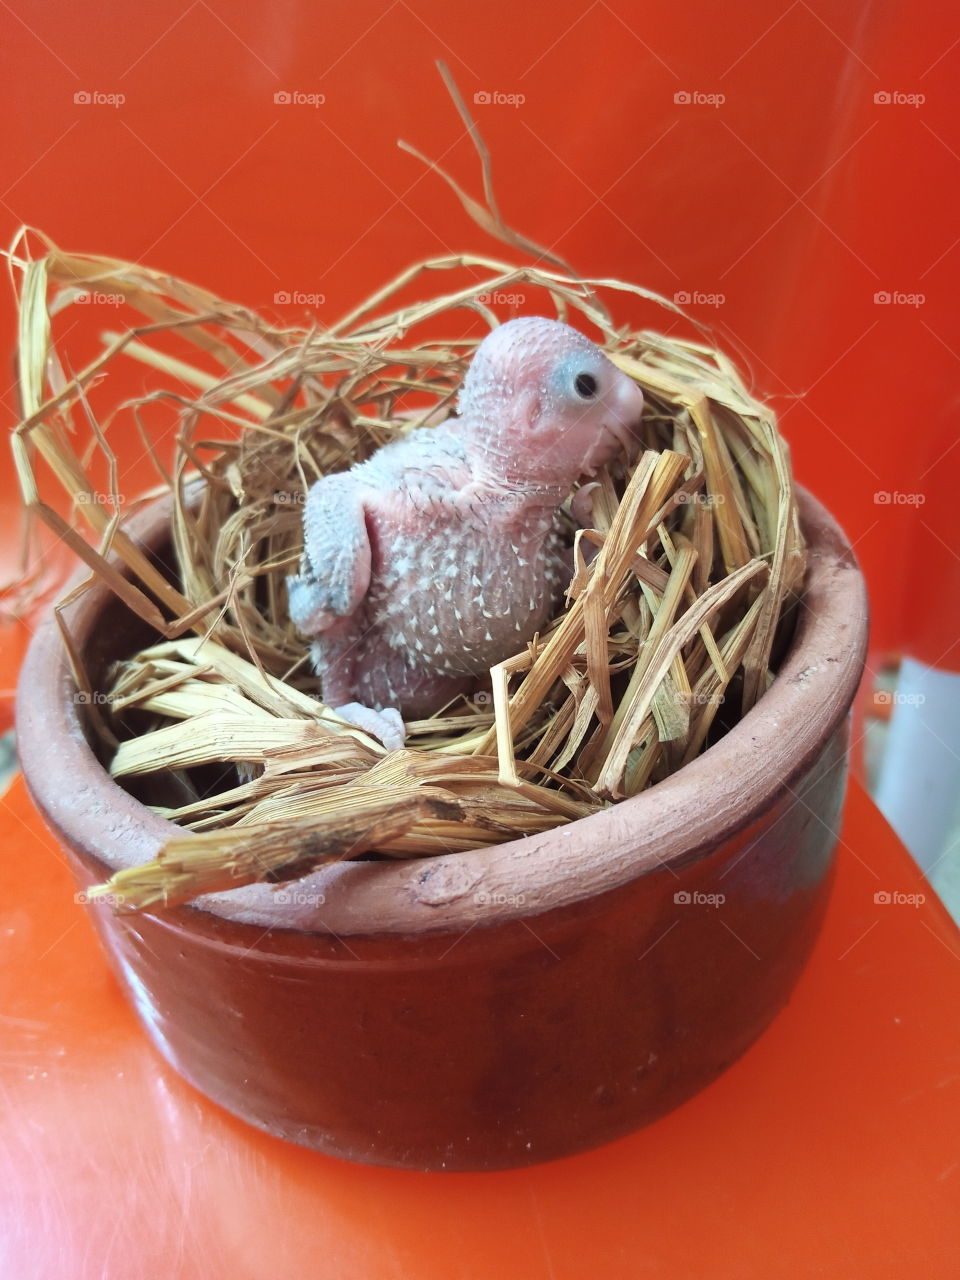 A small parrot came out of an egg in a nest